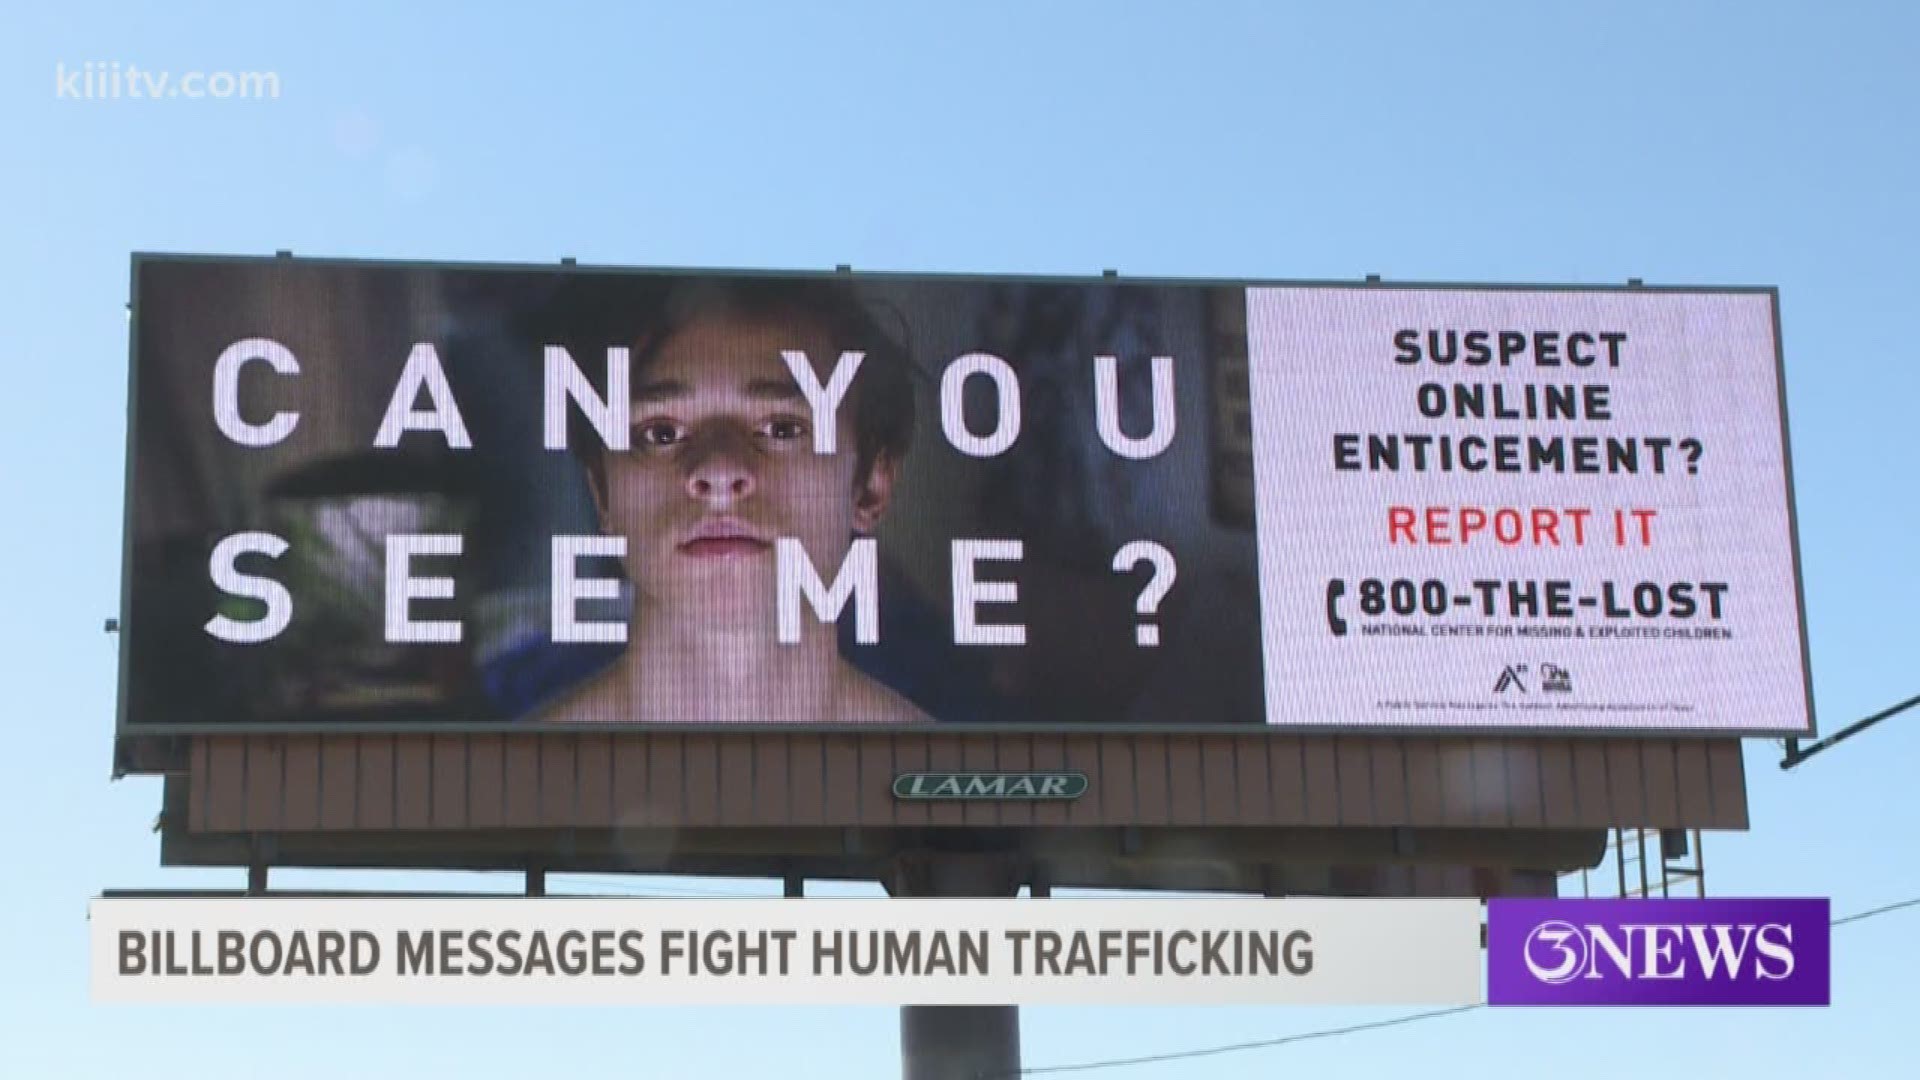 Huge electronic billboards are now among the state's latest tools to fight human trafficking.